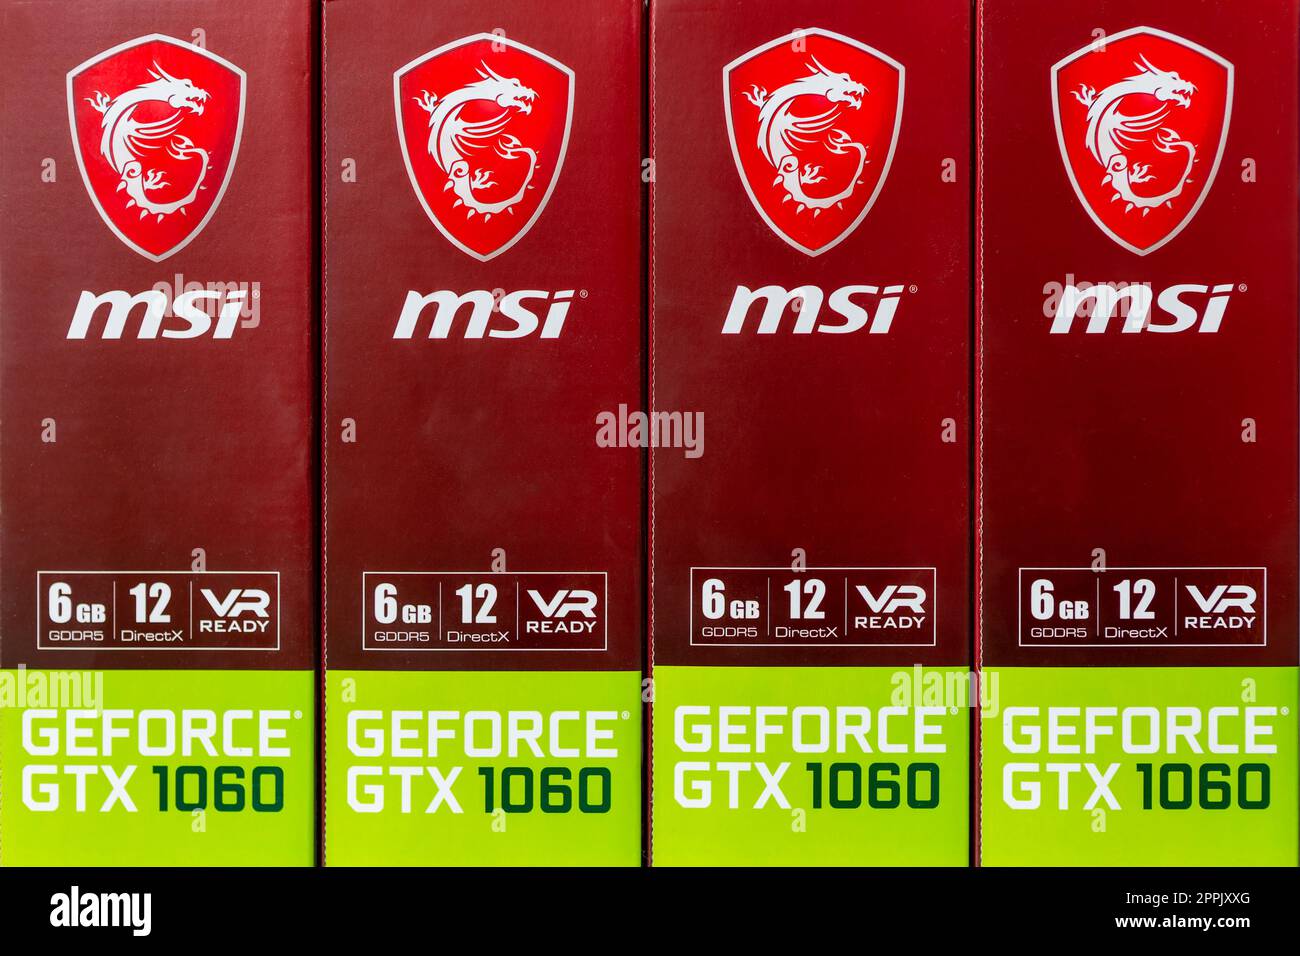 Kyiv, Ukraine - 27 January 2022: Four packages in a row Nvidia Geforce GTX 1060 graphics illustrative editorial. Components for a personal computer - boxes MSI Gaming video cards on a store counter. Stock Photo